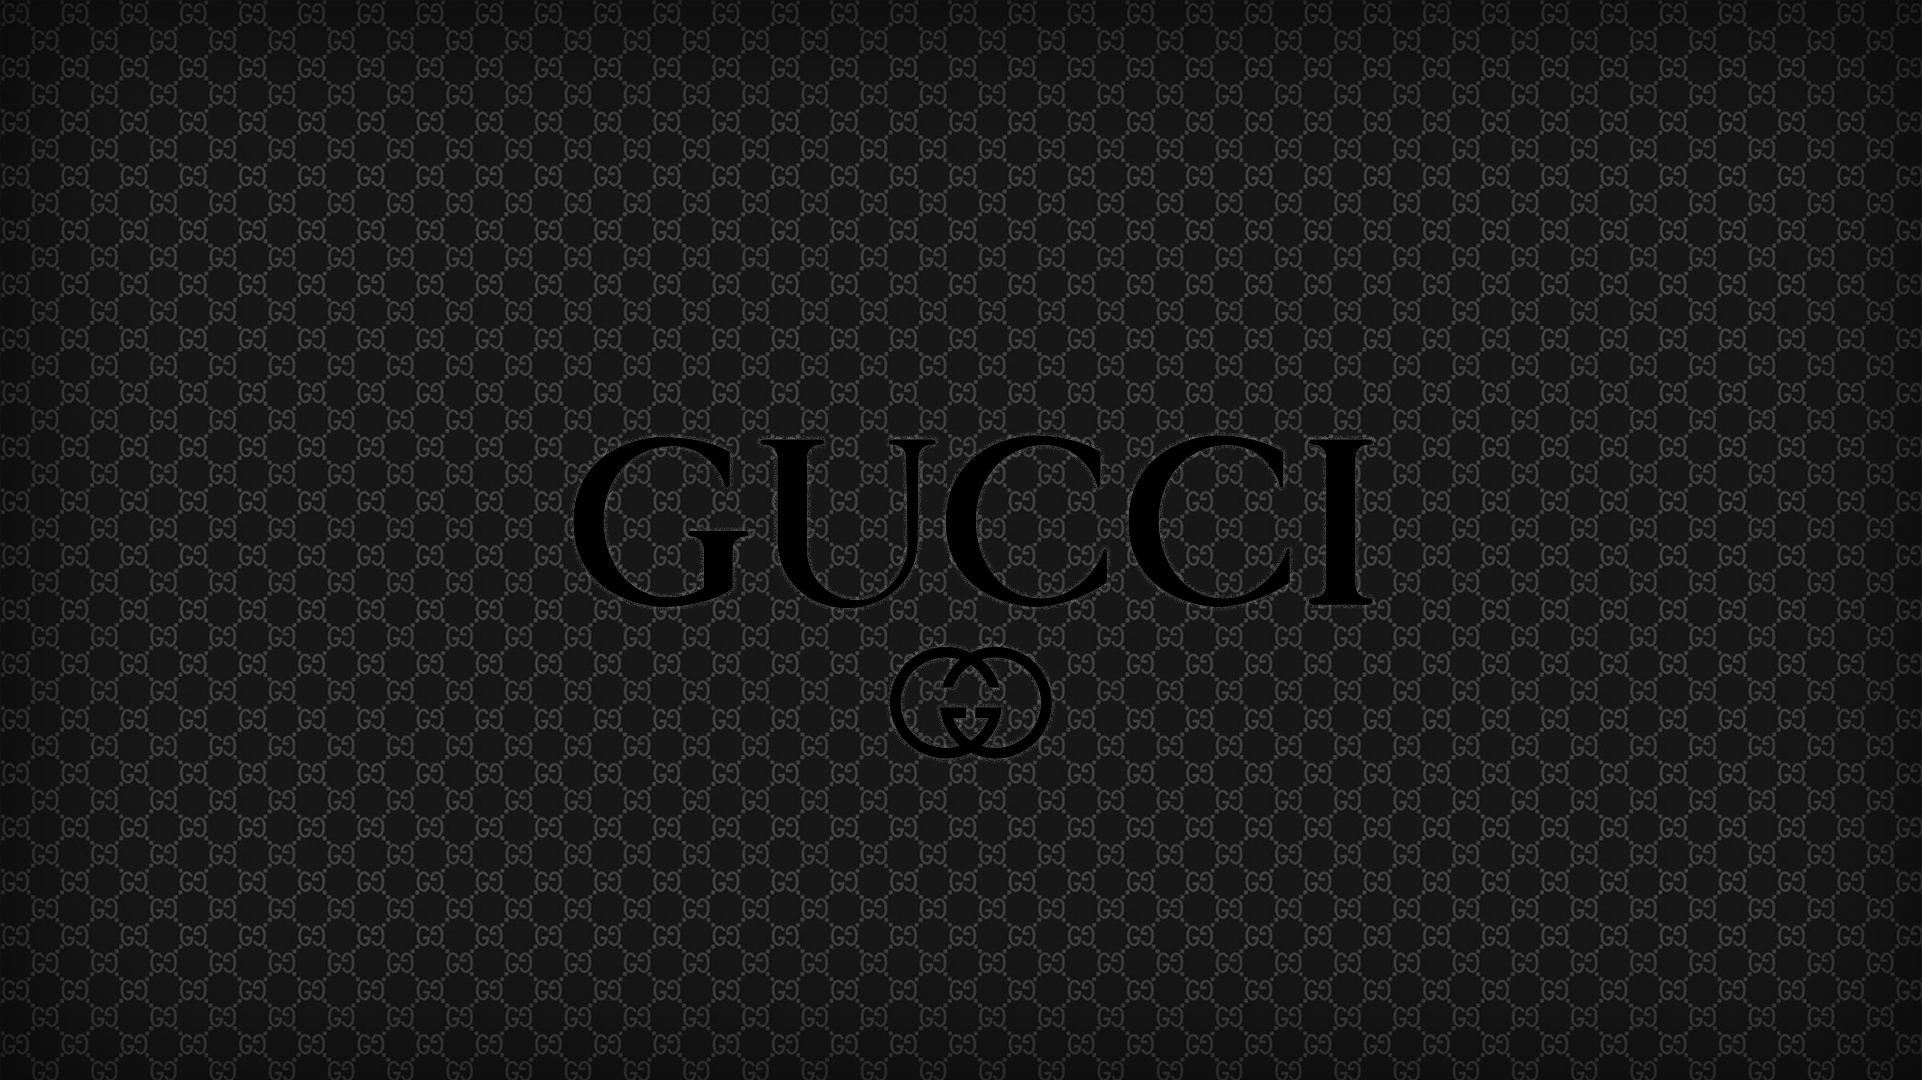 Girly Gucci Wallpapers On Wallpaperdog 825 x 1280 png 812 kb. girly gucci wallpapers on wallpaperdog